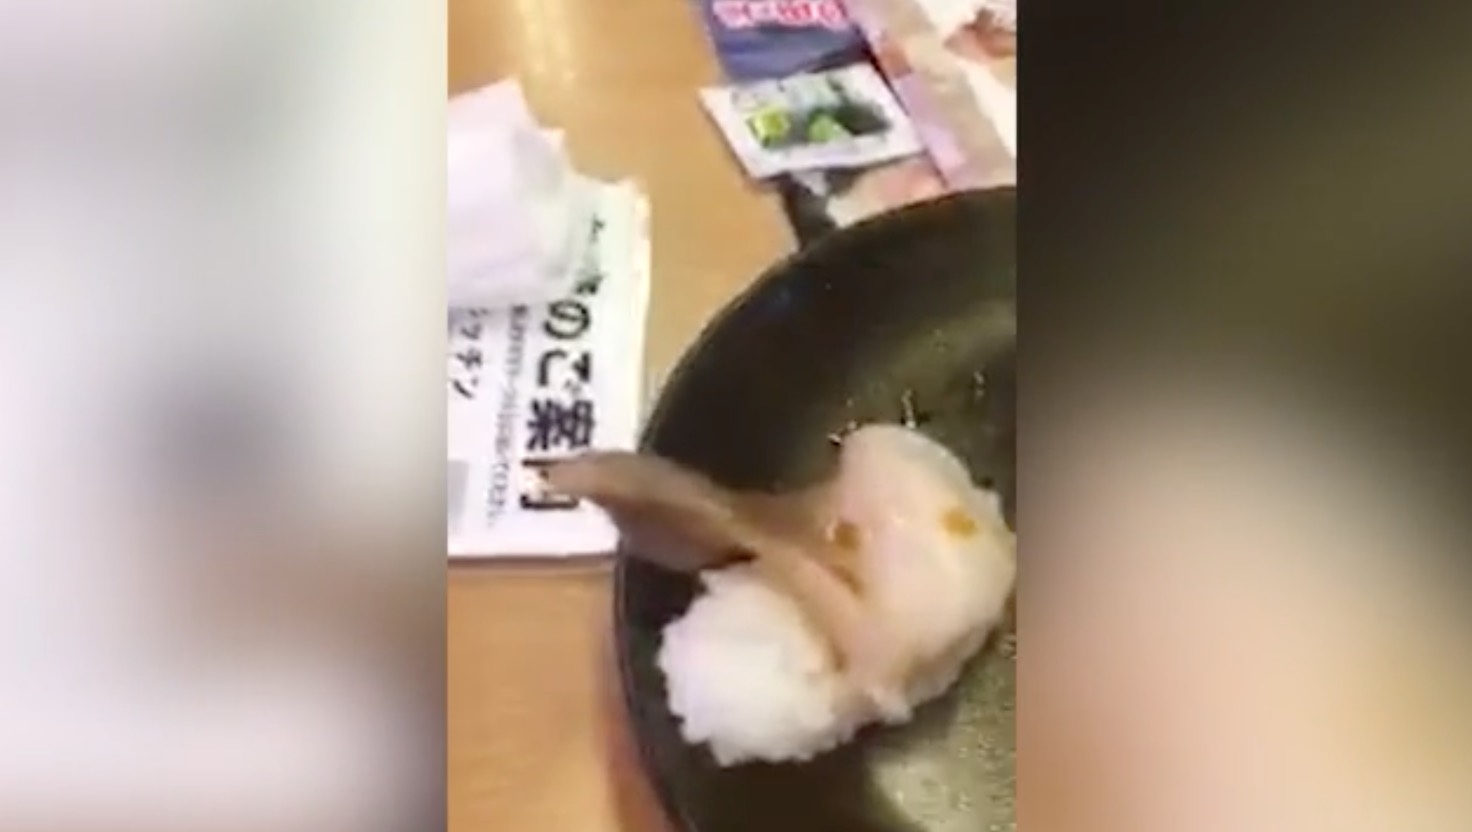 Sushi 'comes alive and waves' on customer's plate (Watch)